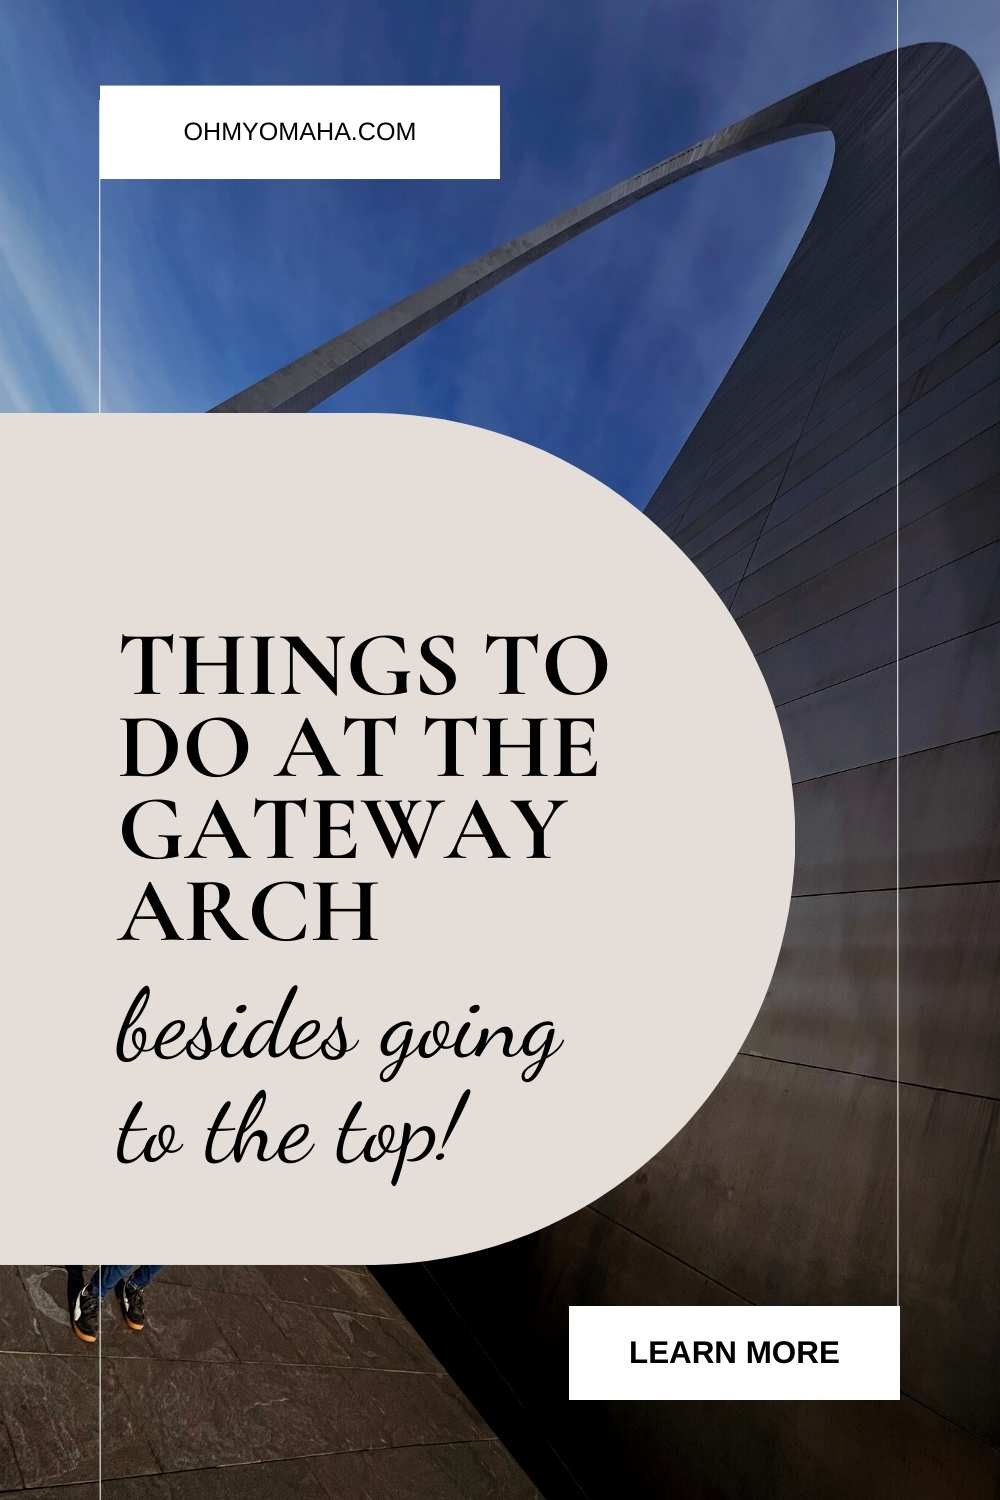 Headed to the Gateway Arch in St. Louis? There is more to do there than ride to the top of the Arch for the view! This post shares details on the museum, eateries, shopping, and other things to do besides riding to the top of the Arch.